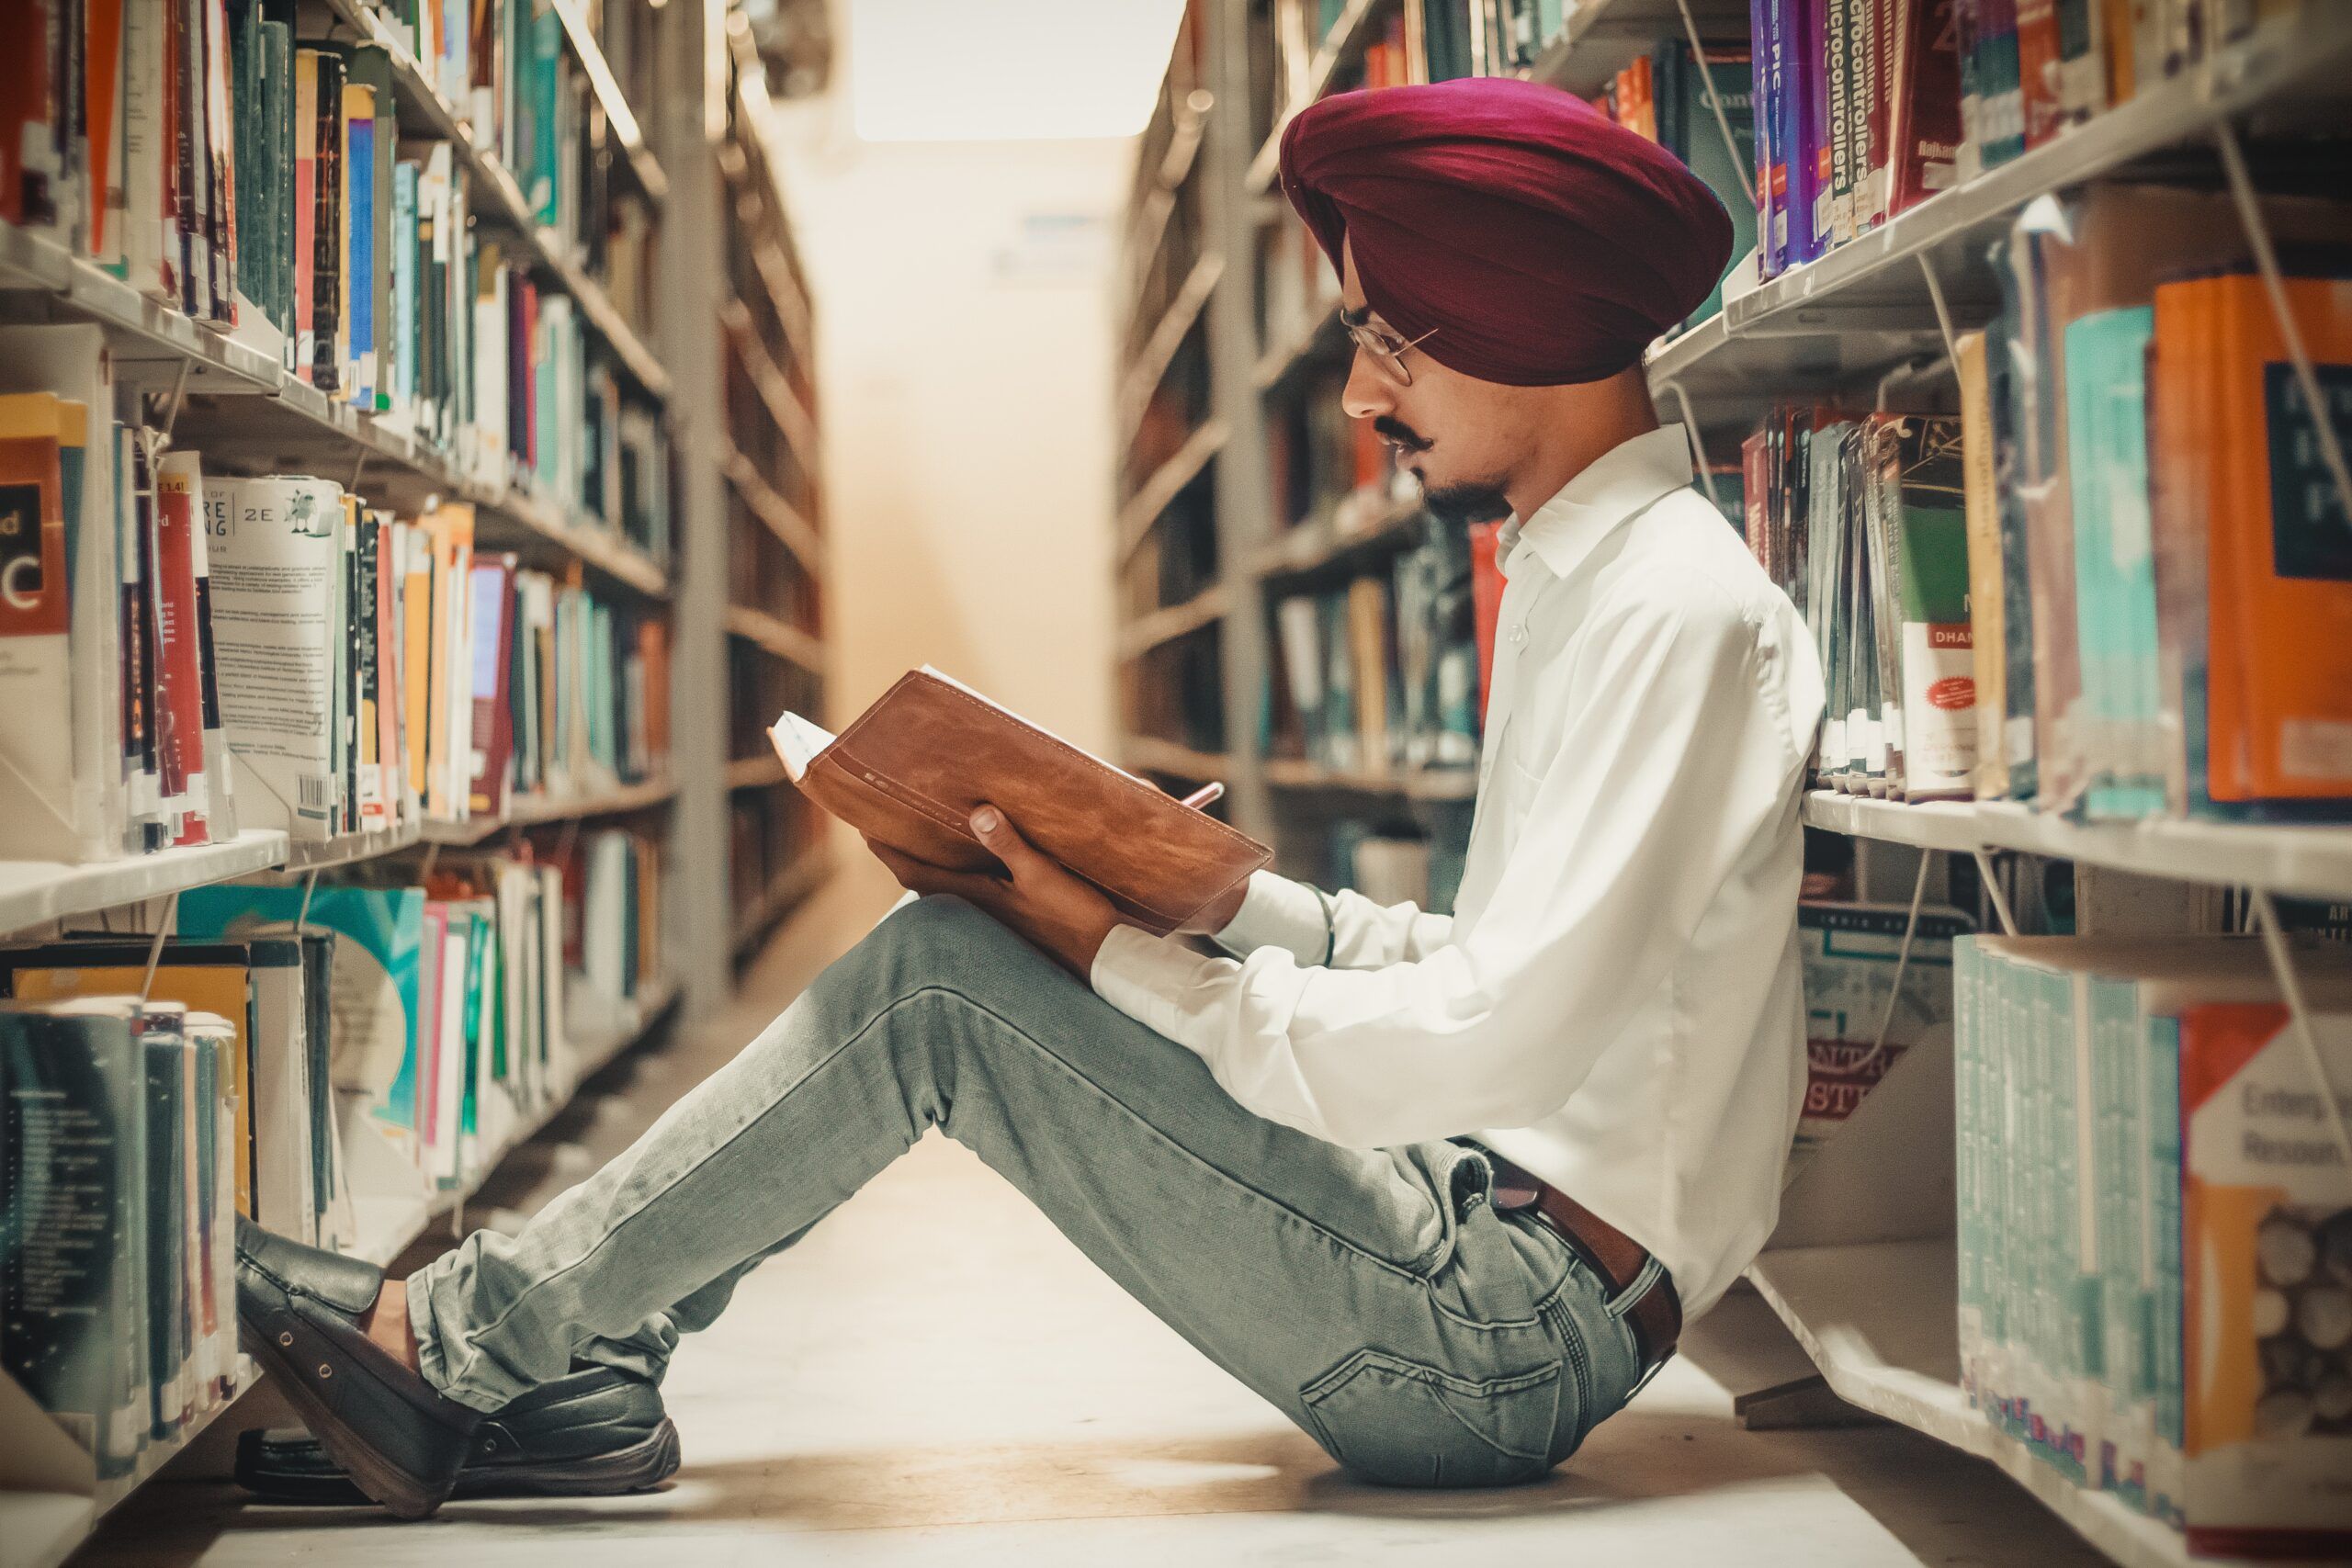 Tan-skinned man with a burgundy turban is sitting in a library reading